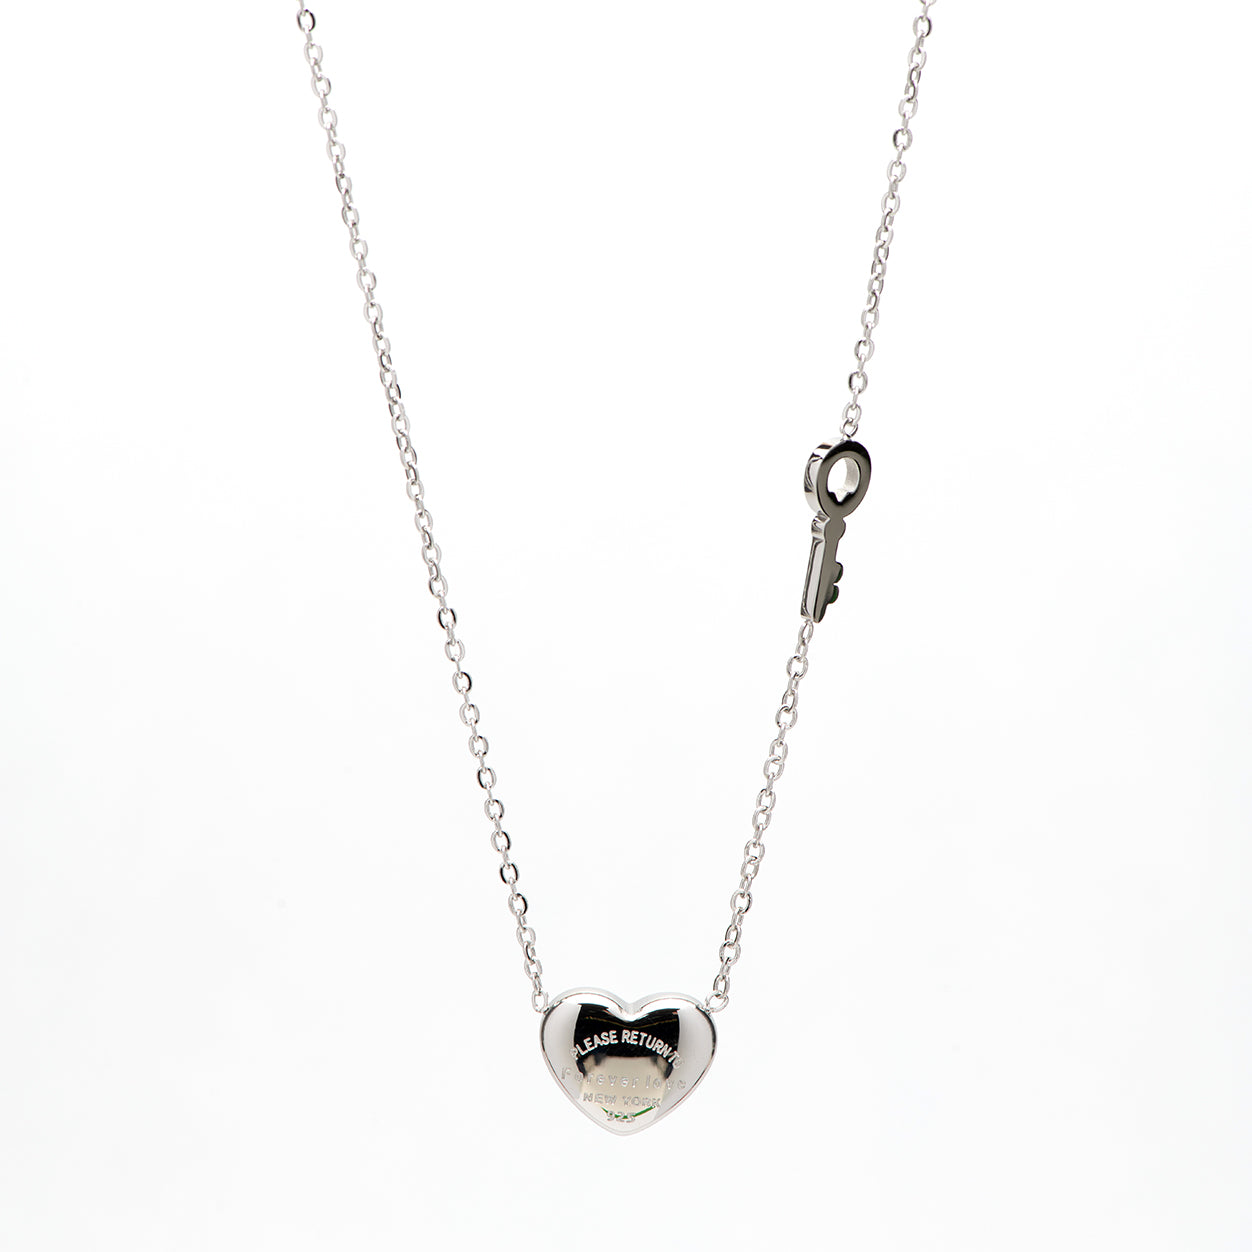 KEY-stainless steel necklace with heart and key